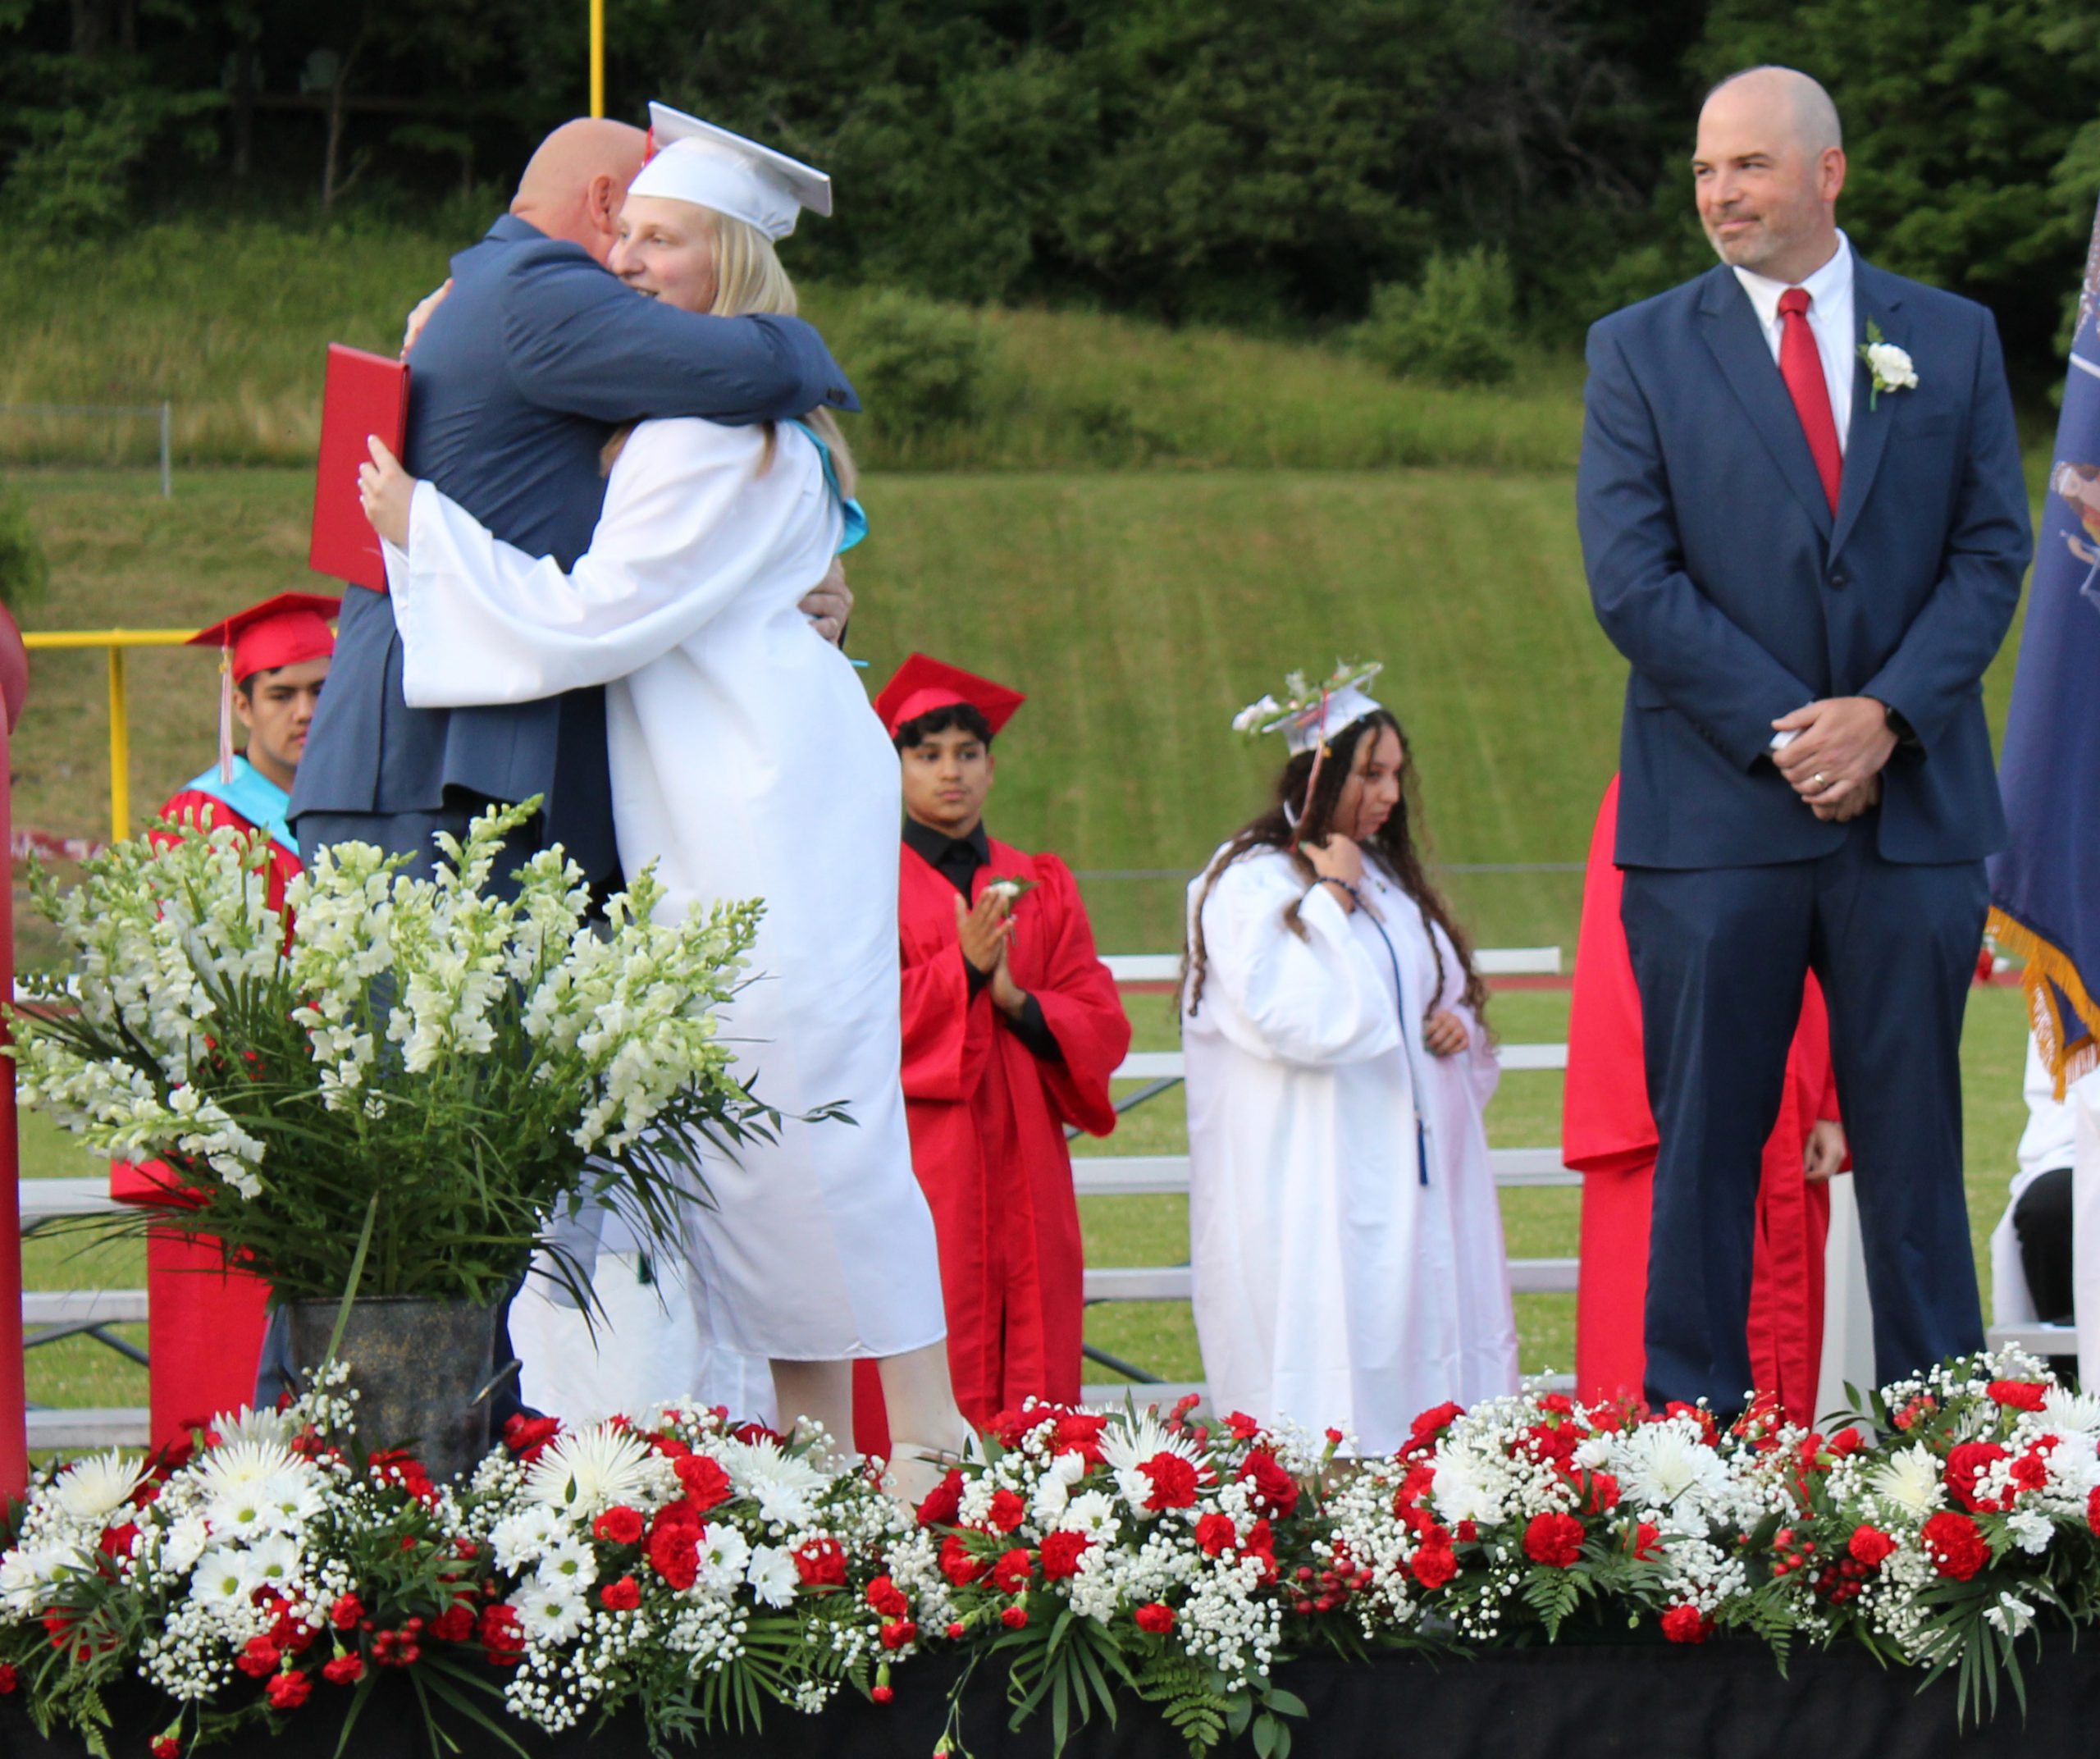 A graduate hugs an adult after she receives her diploma as a man watches